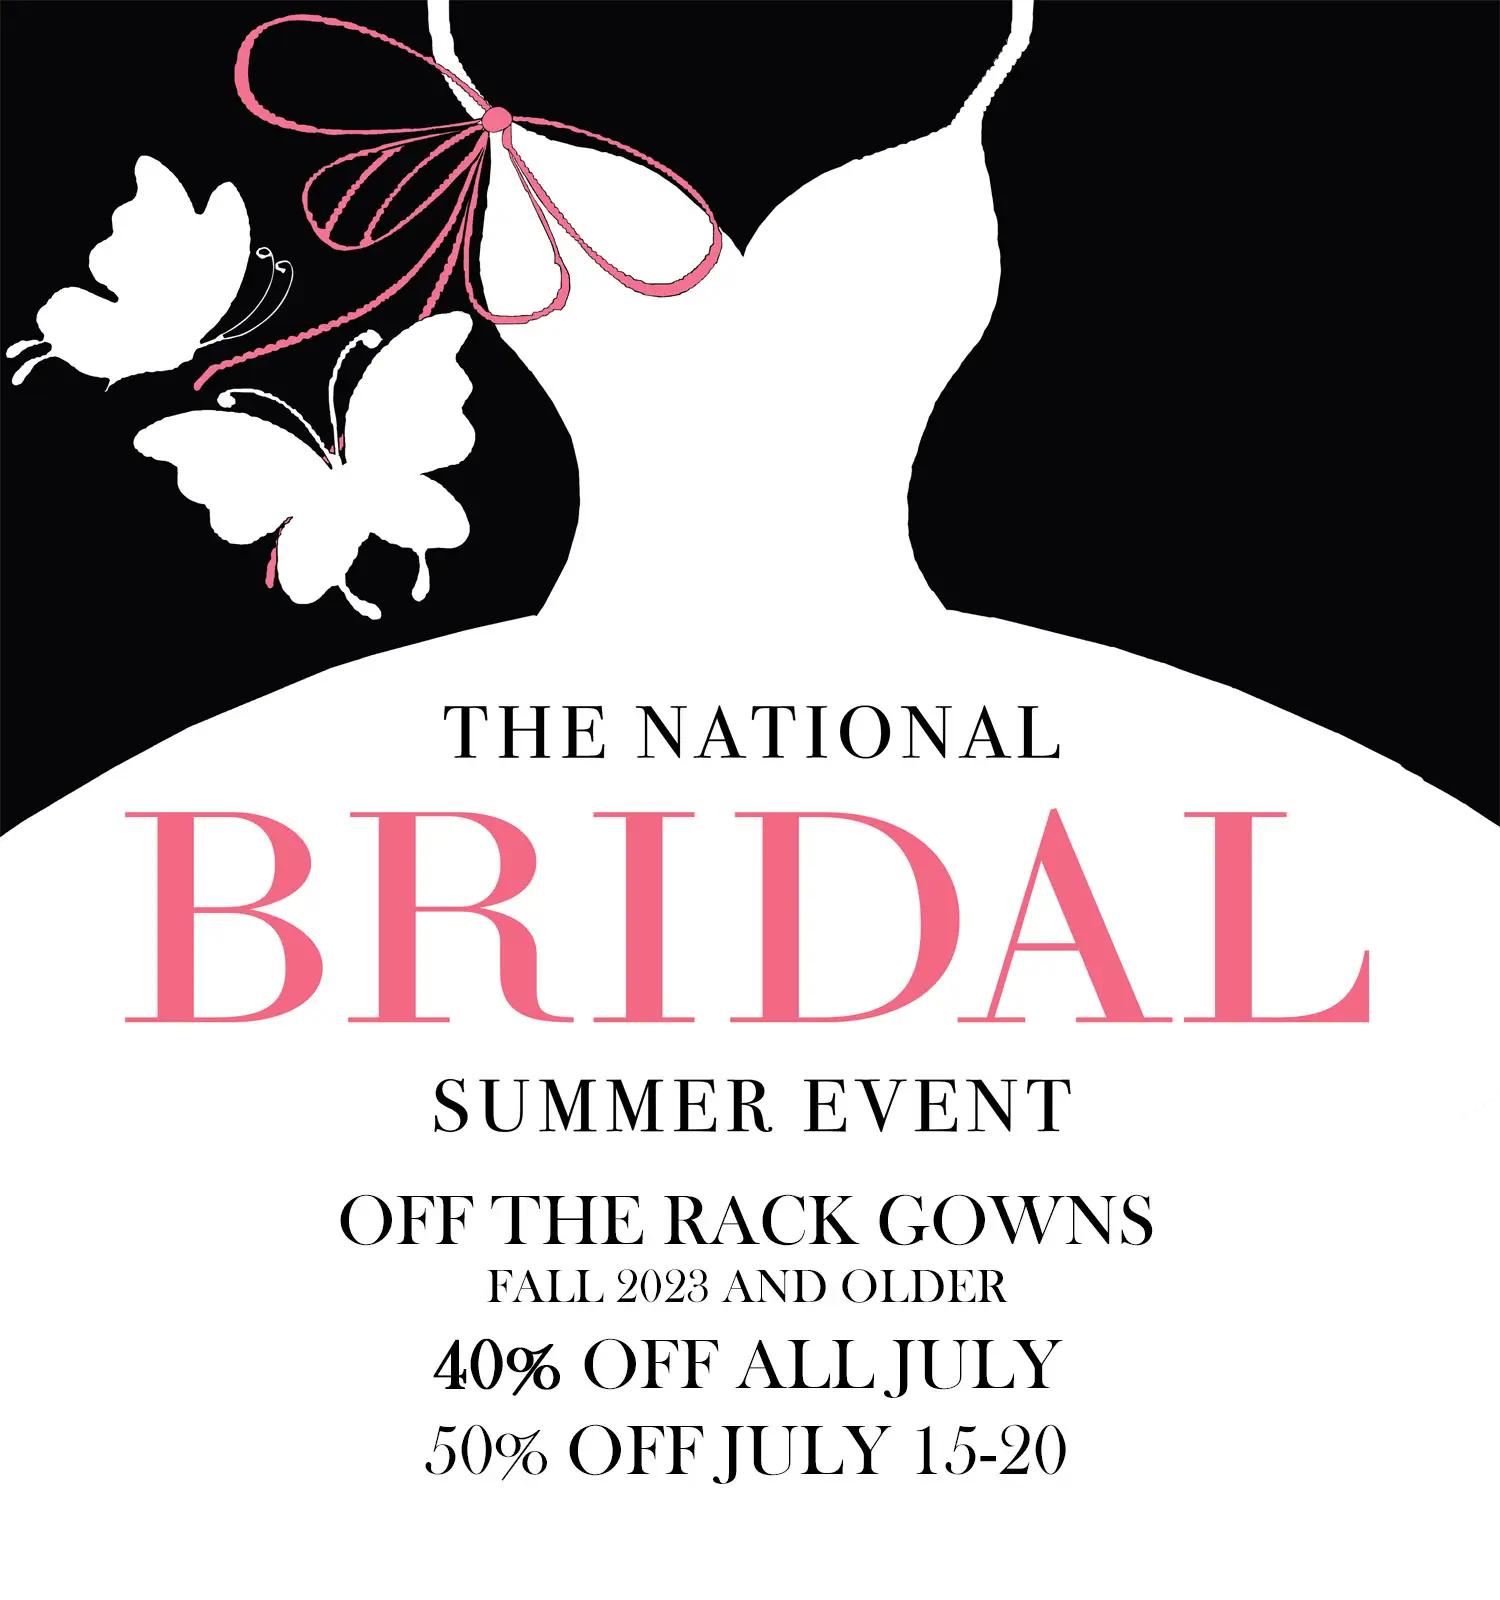 The National Bridal Summer Event